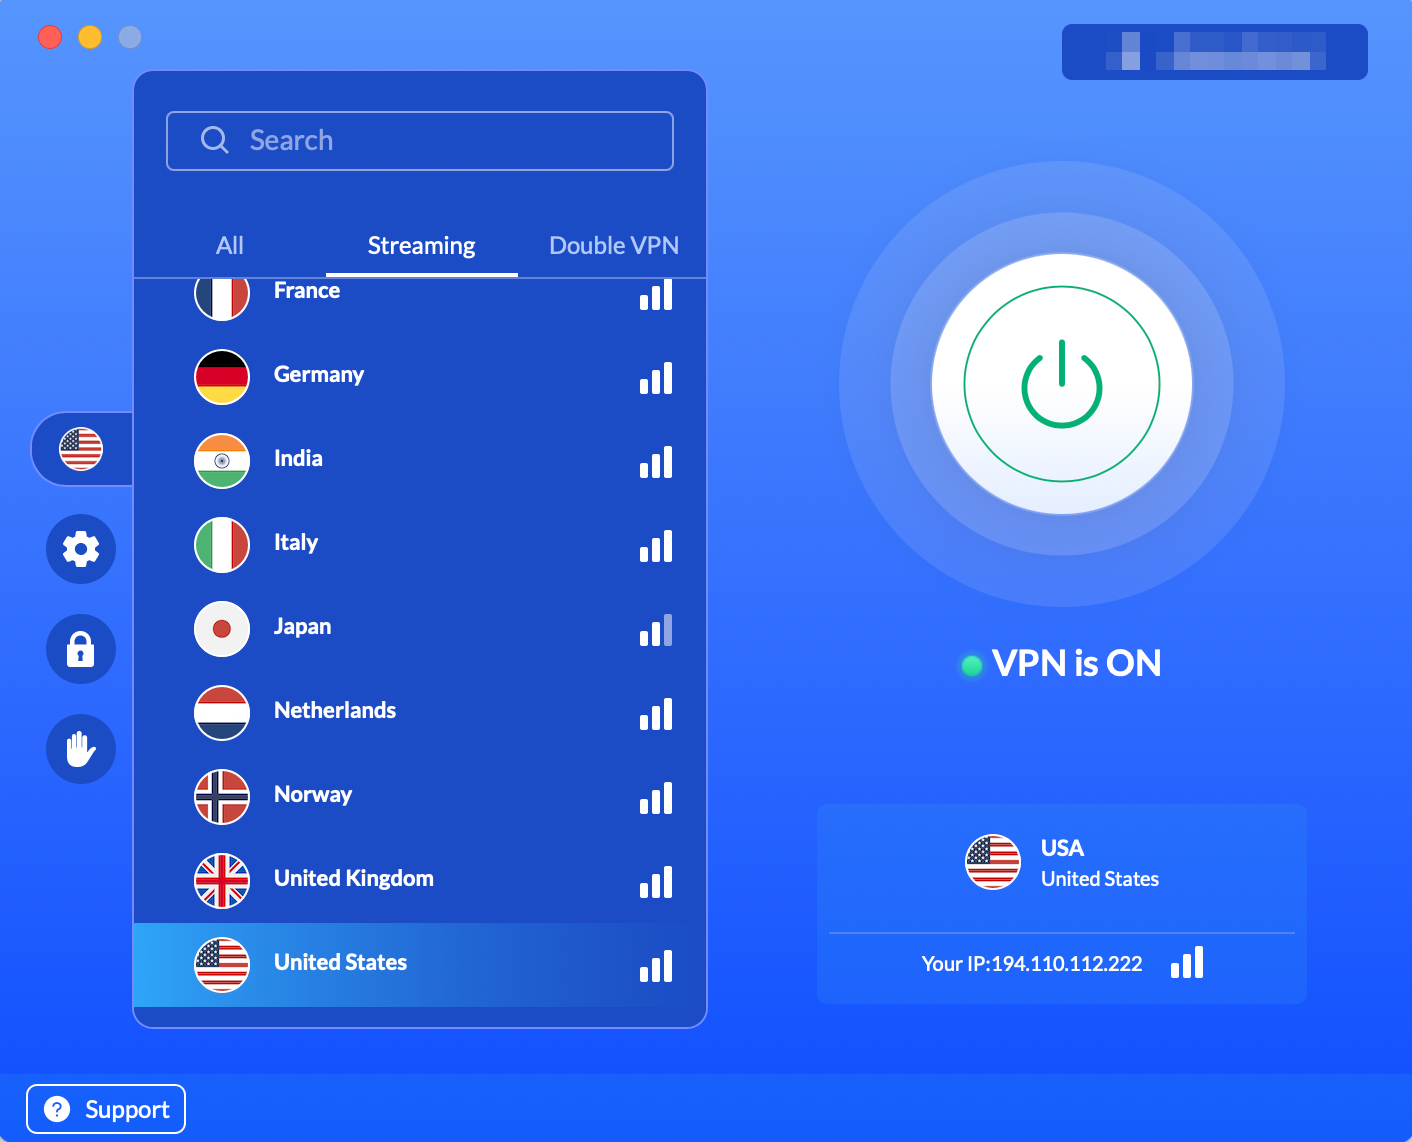 User is connected to the VPN server in the US